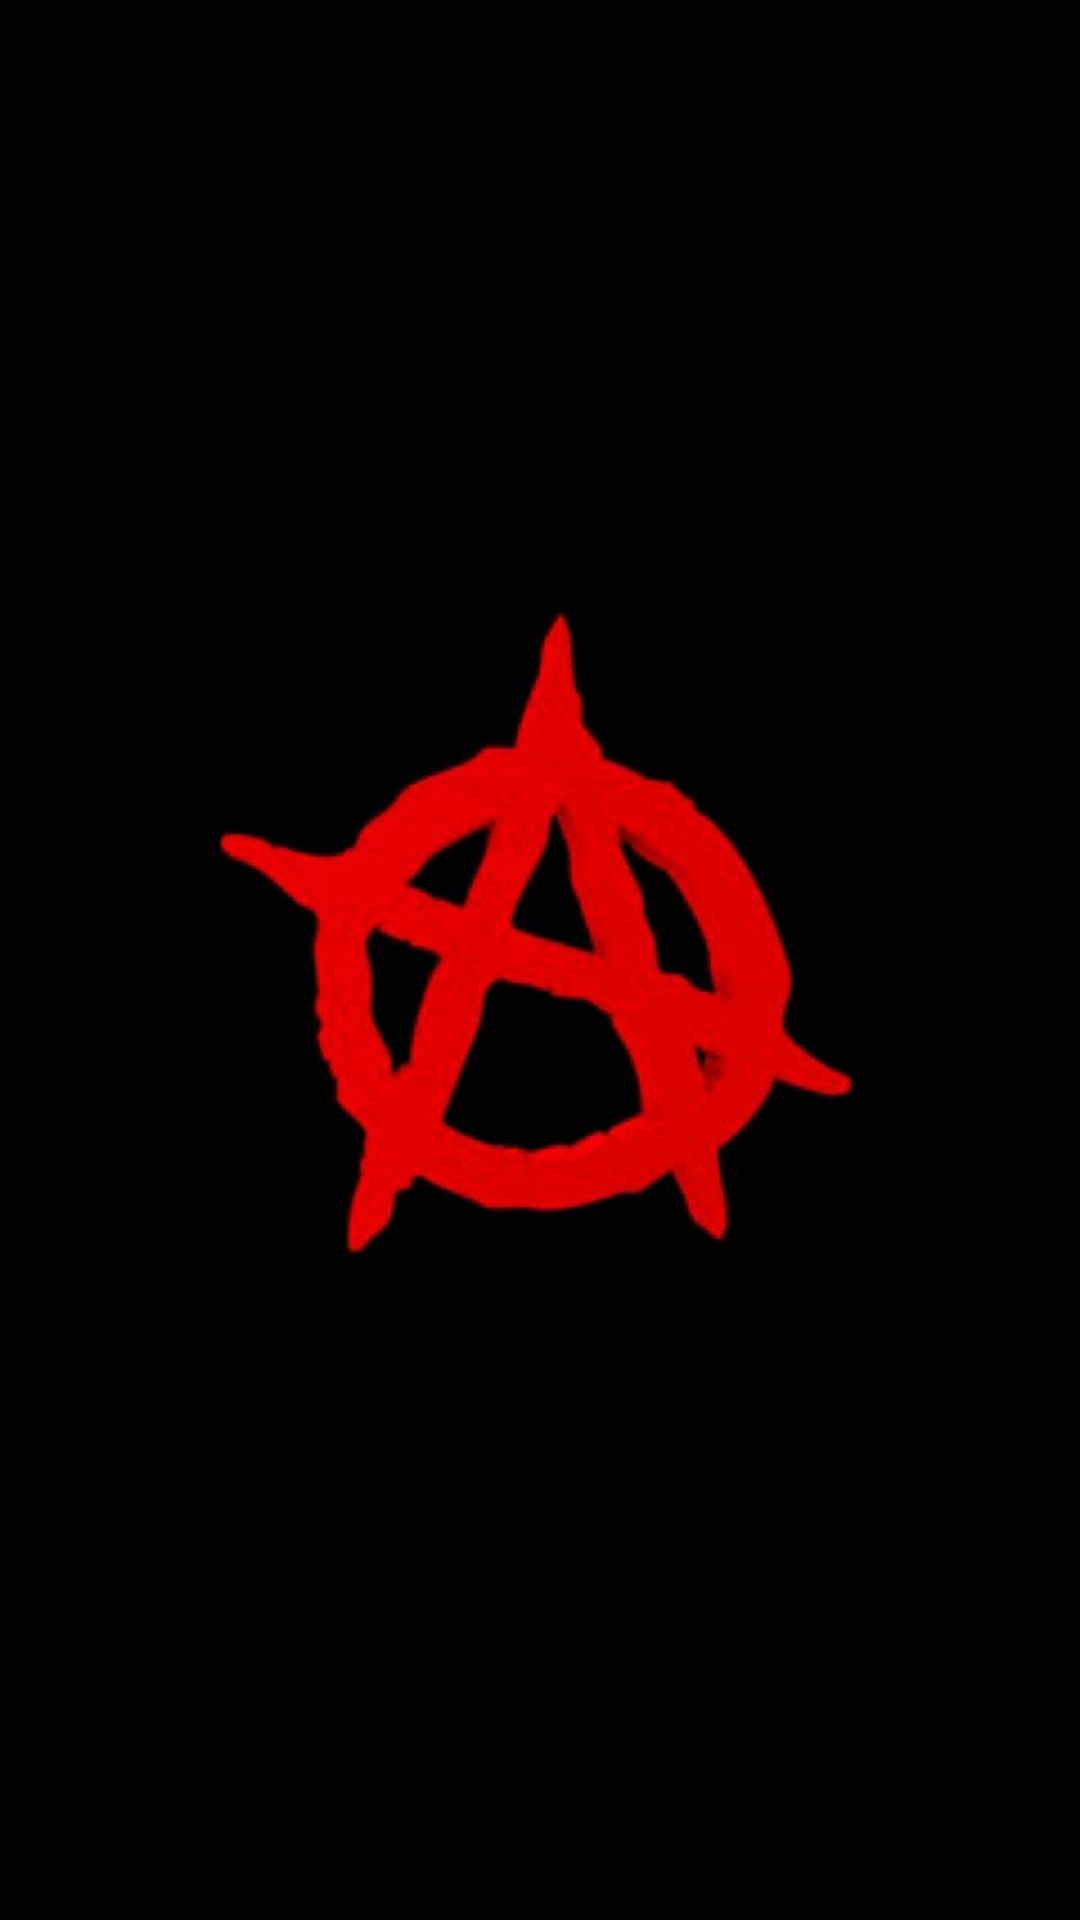 Wallpaper Anarchism In Anarcho